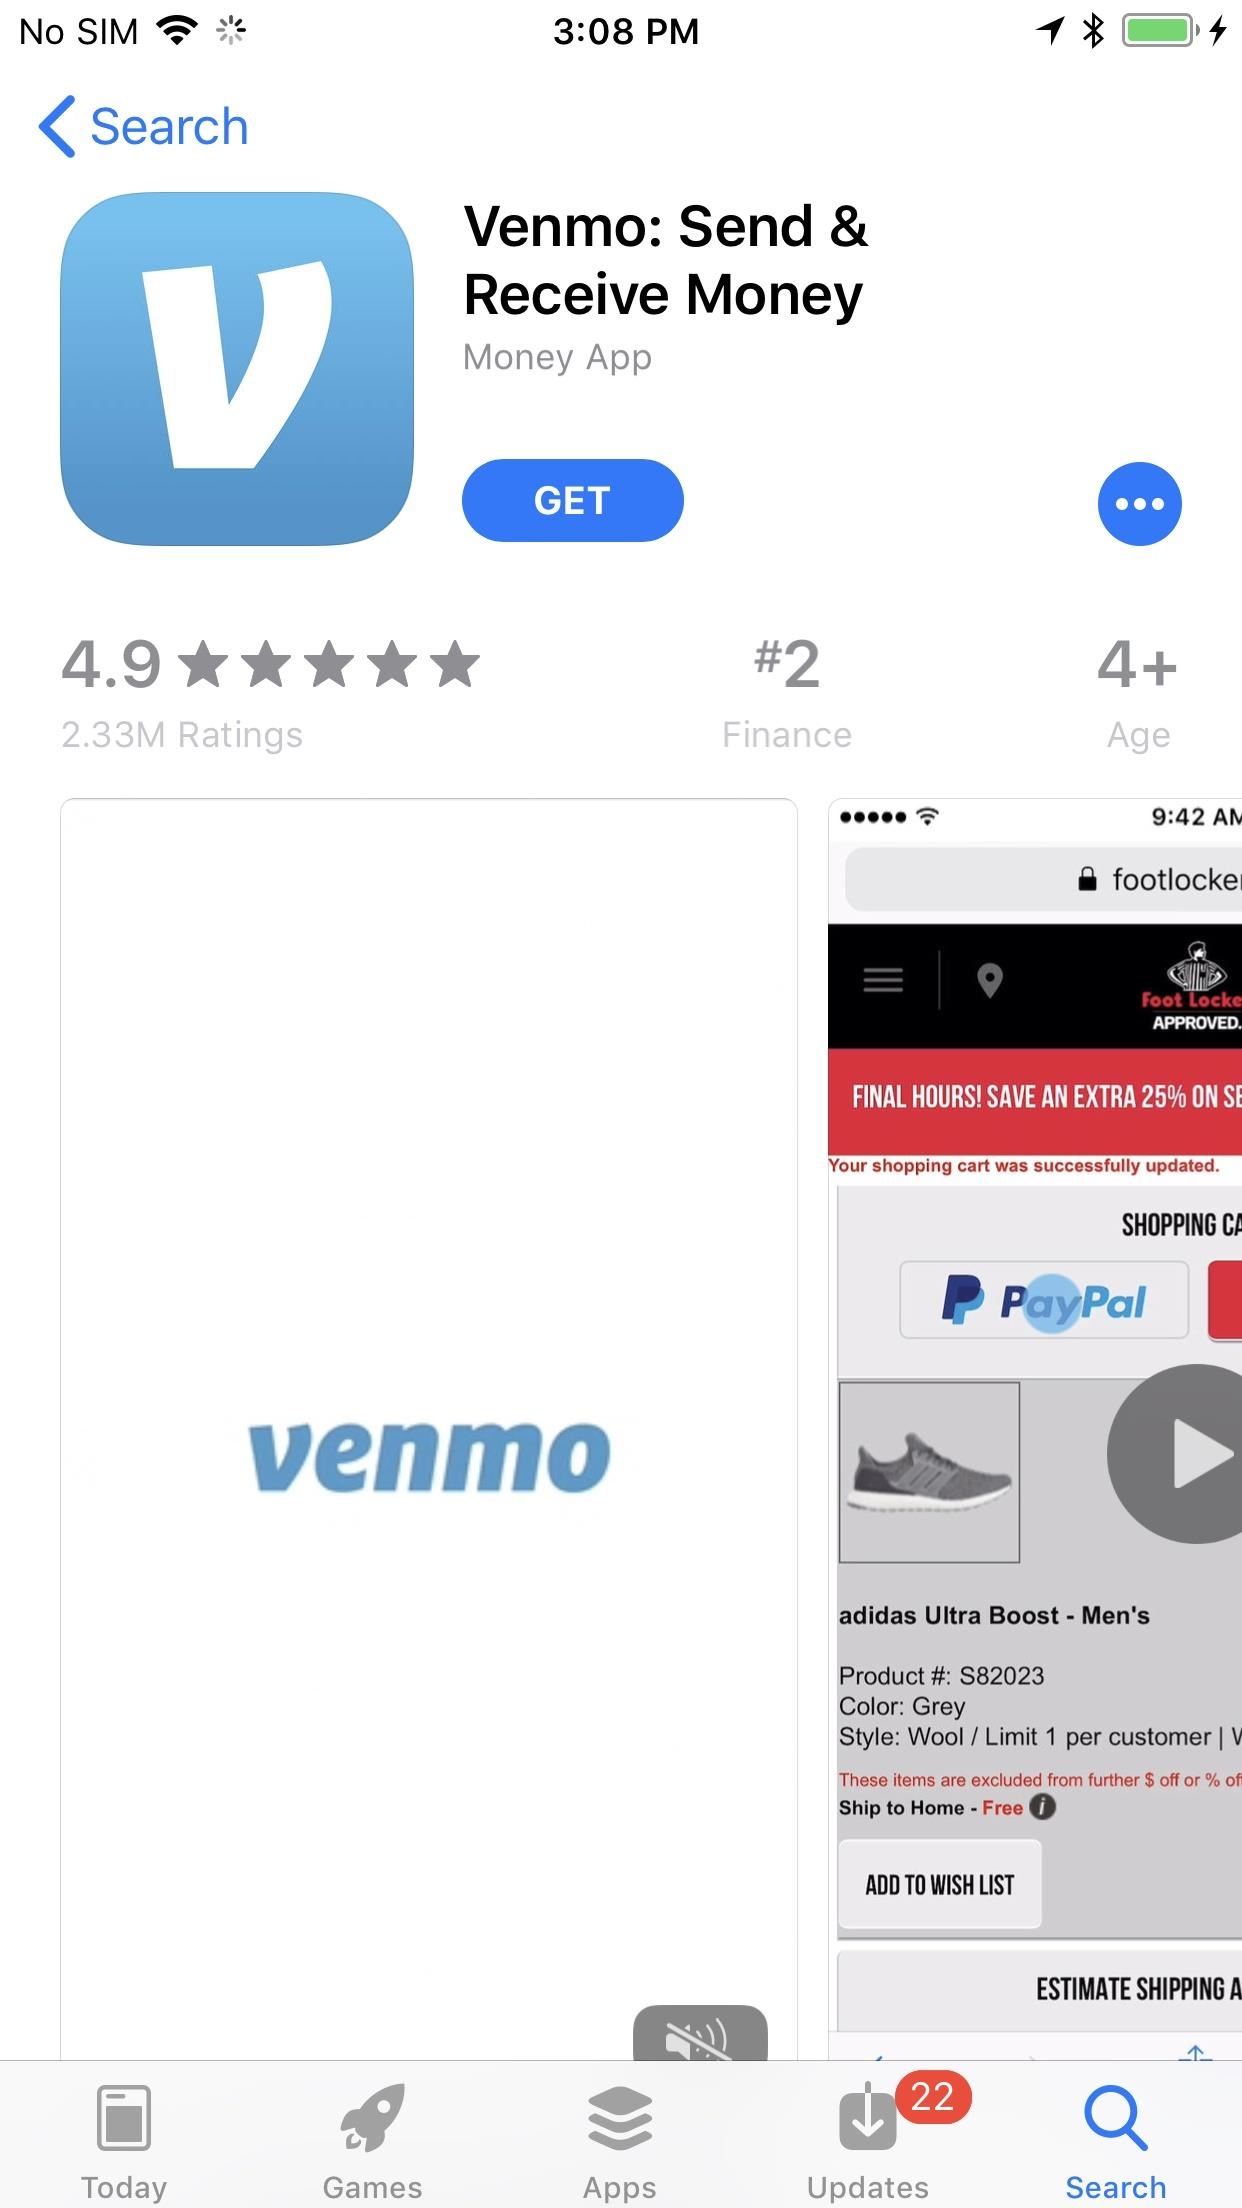 Venmo 101: The Fees, Limits & Fine Print You Need to Know About